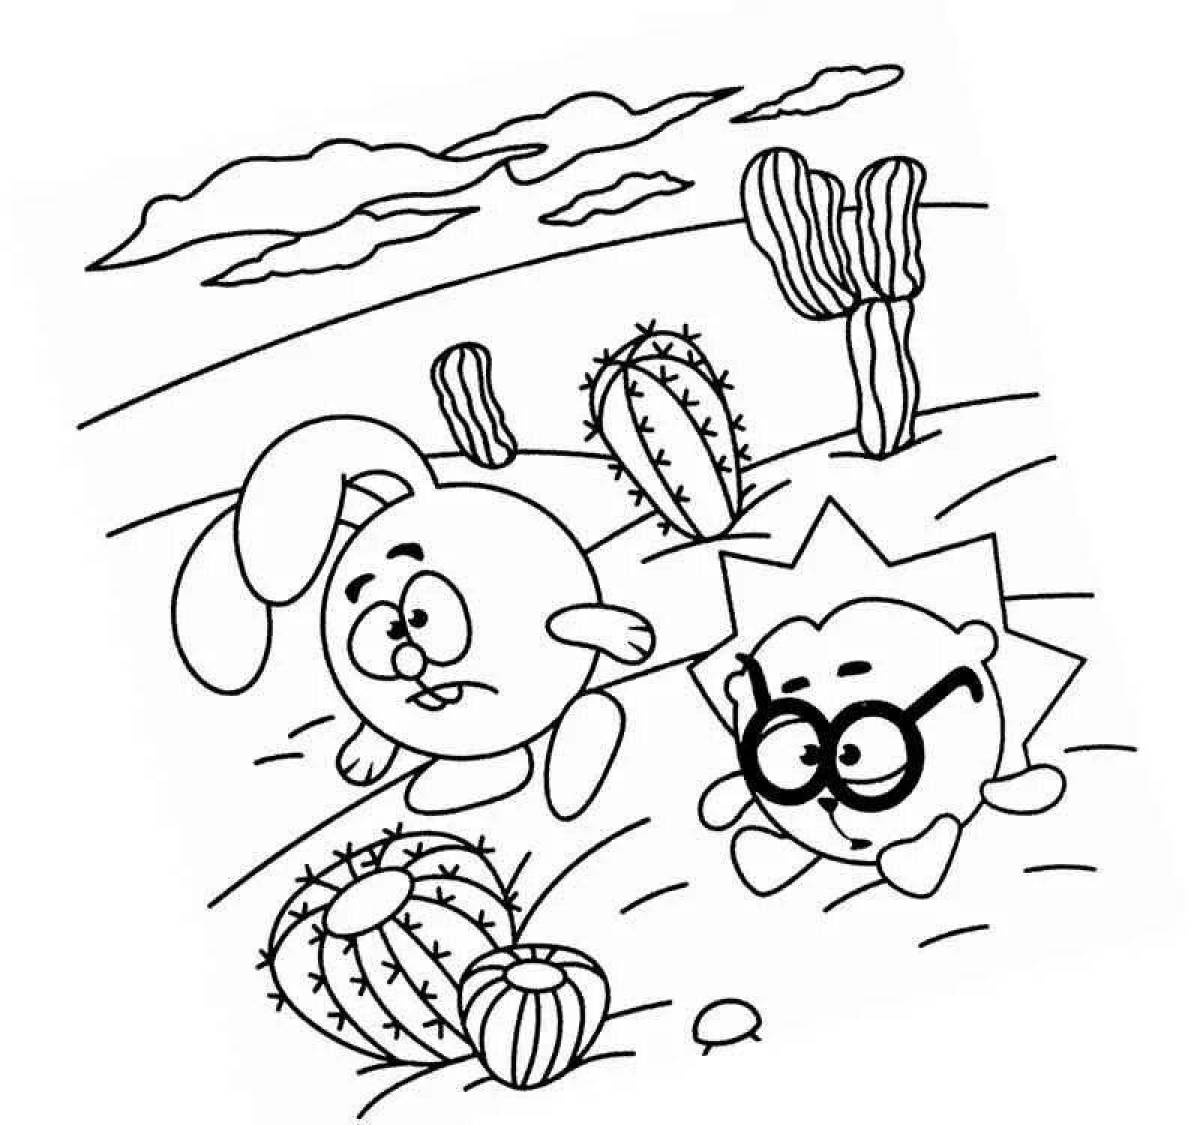 Colour explosion baby and hedgehog coloring page